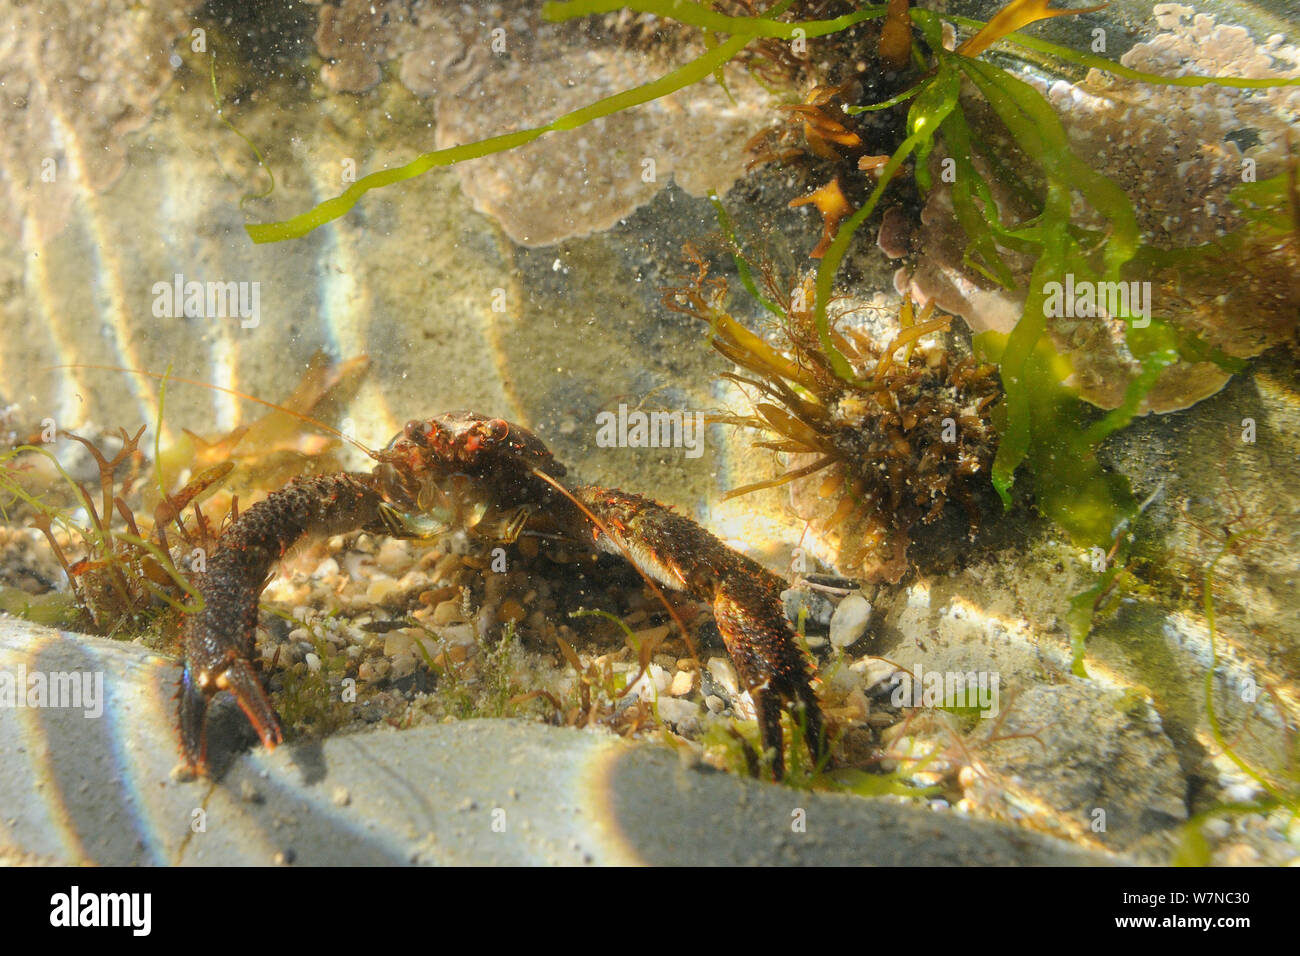 Head on view of Squat lobster (Galathea squamifera) in a rockpool low on the shore among mix of red, green and brown algae, near Falmouth, Cornwall, UK, August. Stock Photo